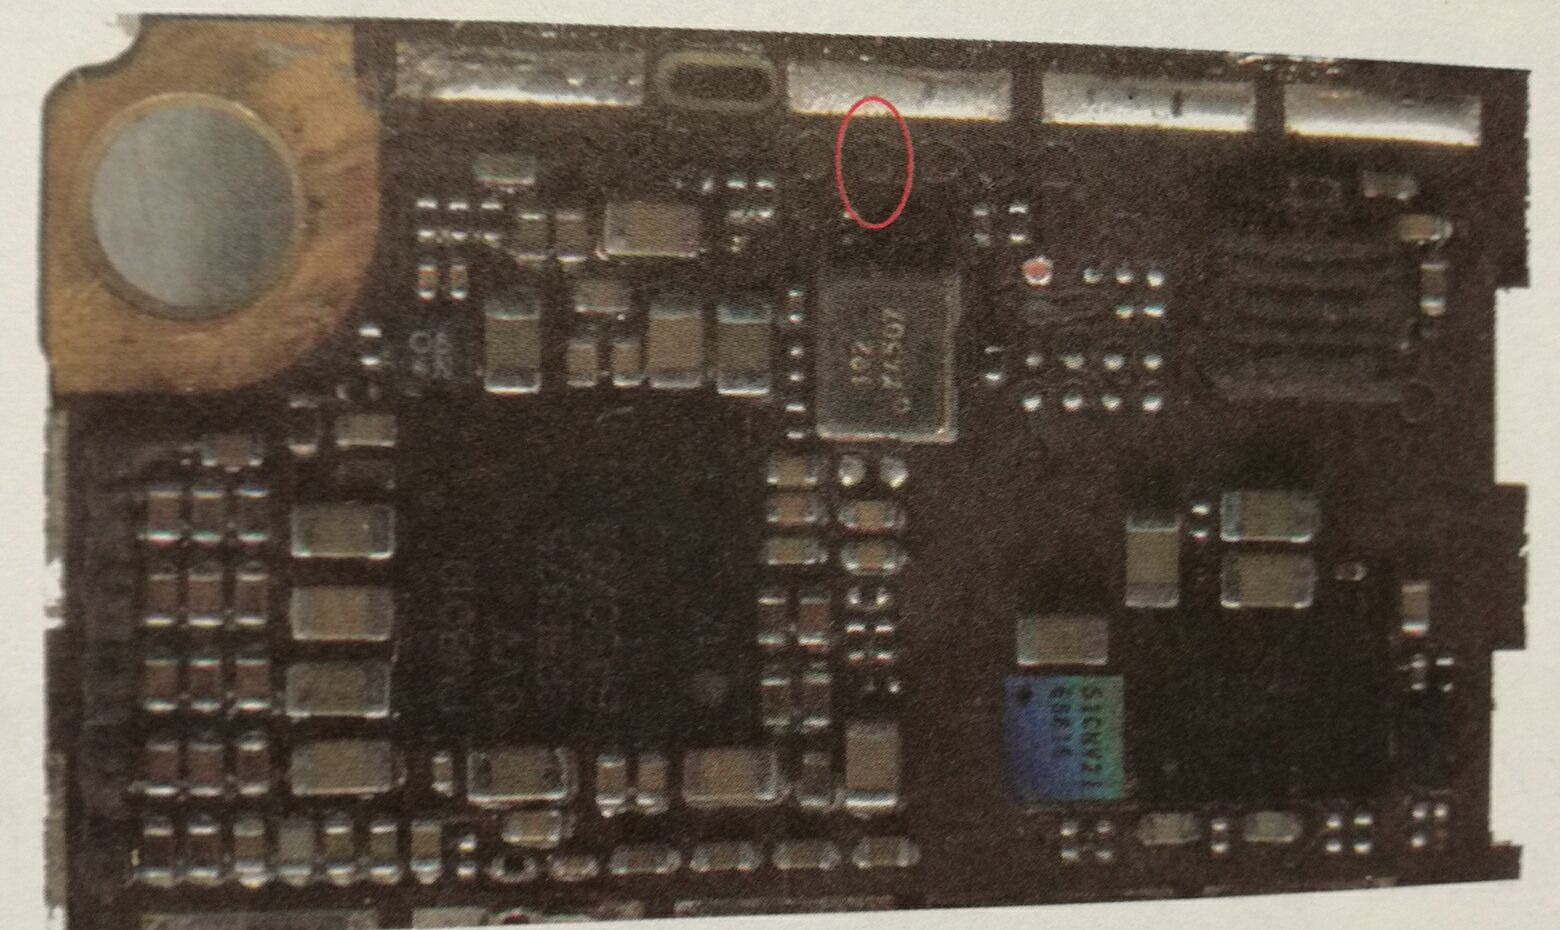 assembly diagram iphone 6 and regularly iPhone Guide no has IMEI 6 service no